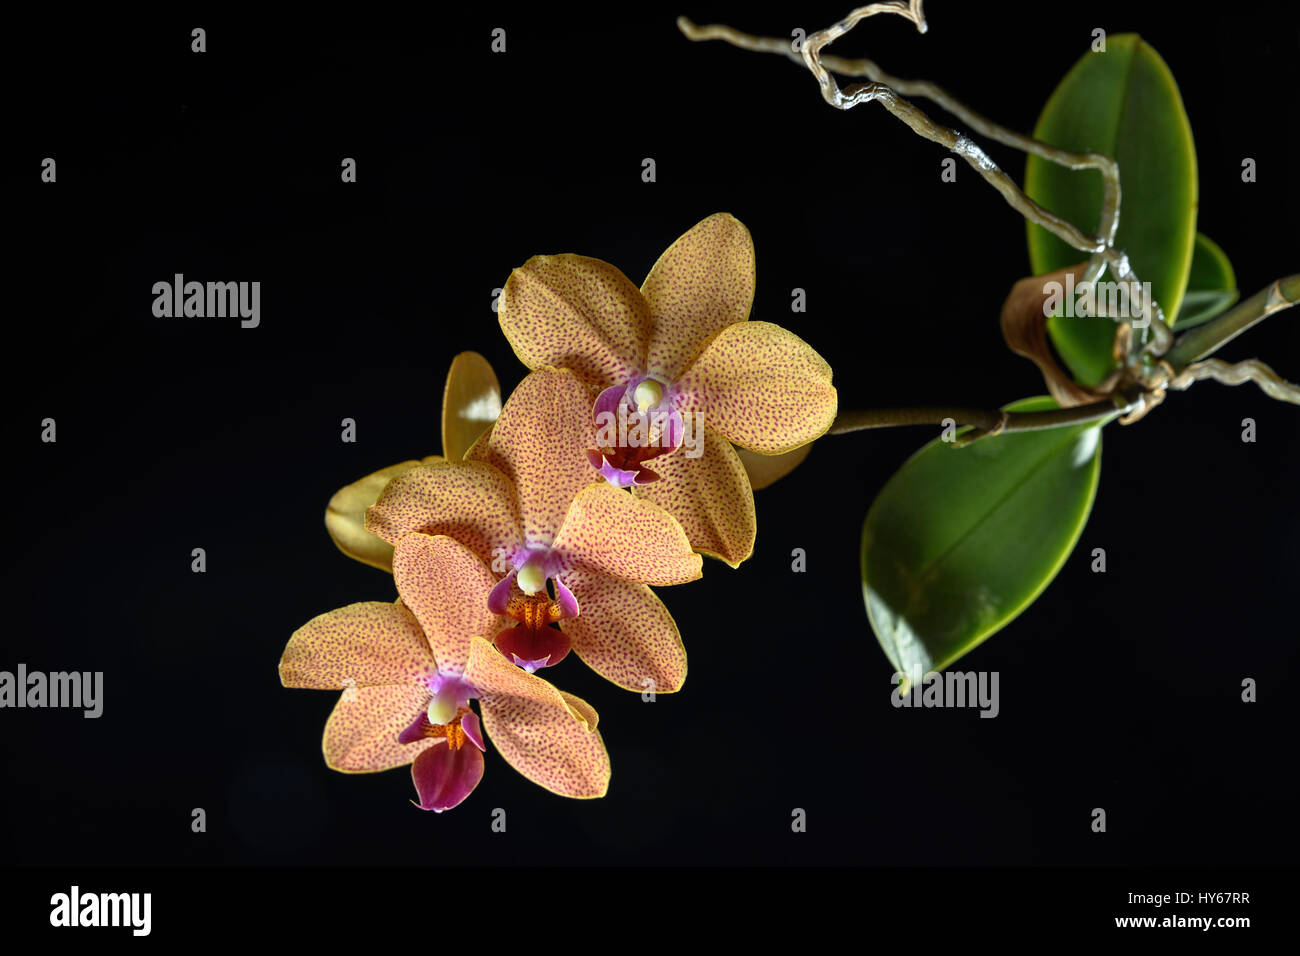 Orchid on dark background Stock Photo